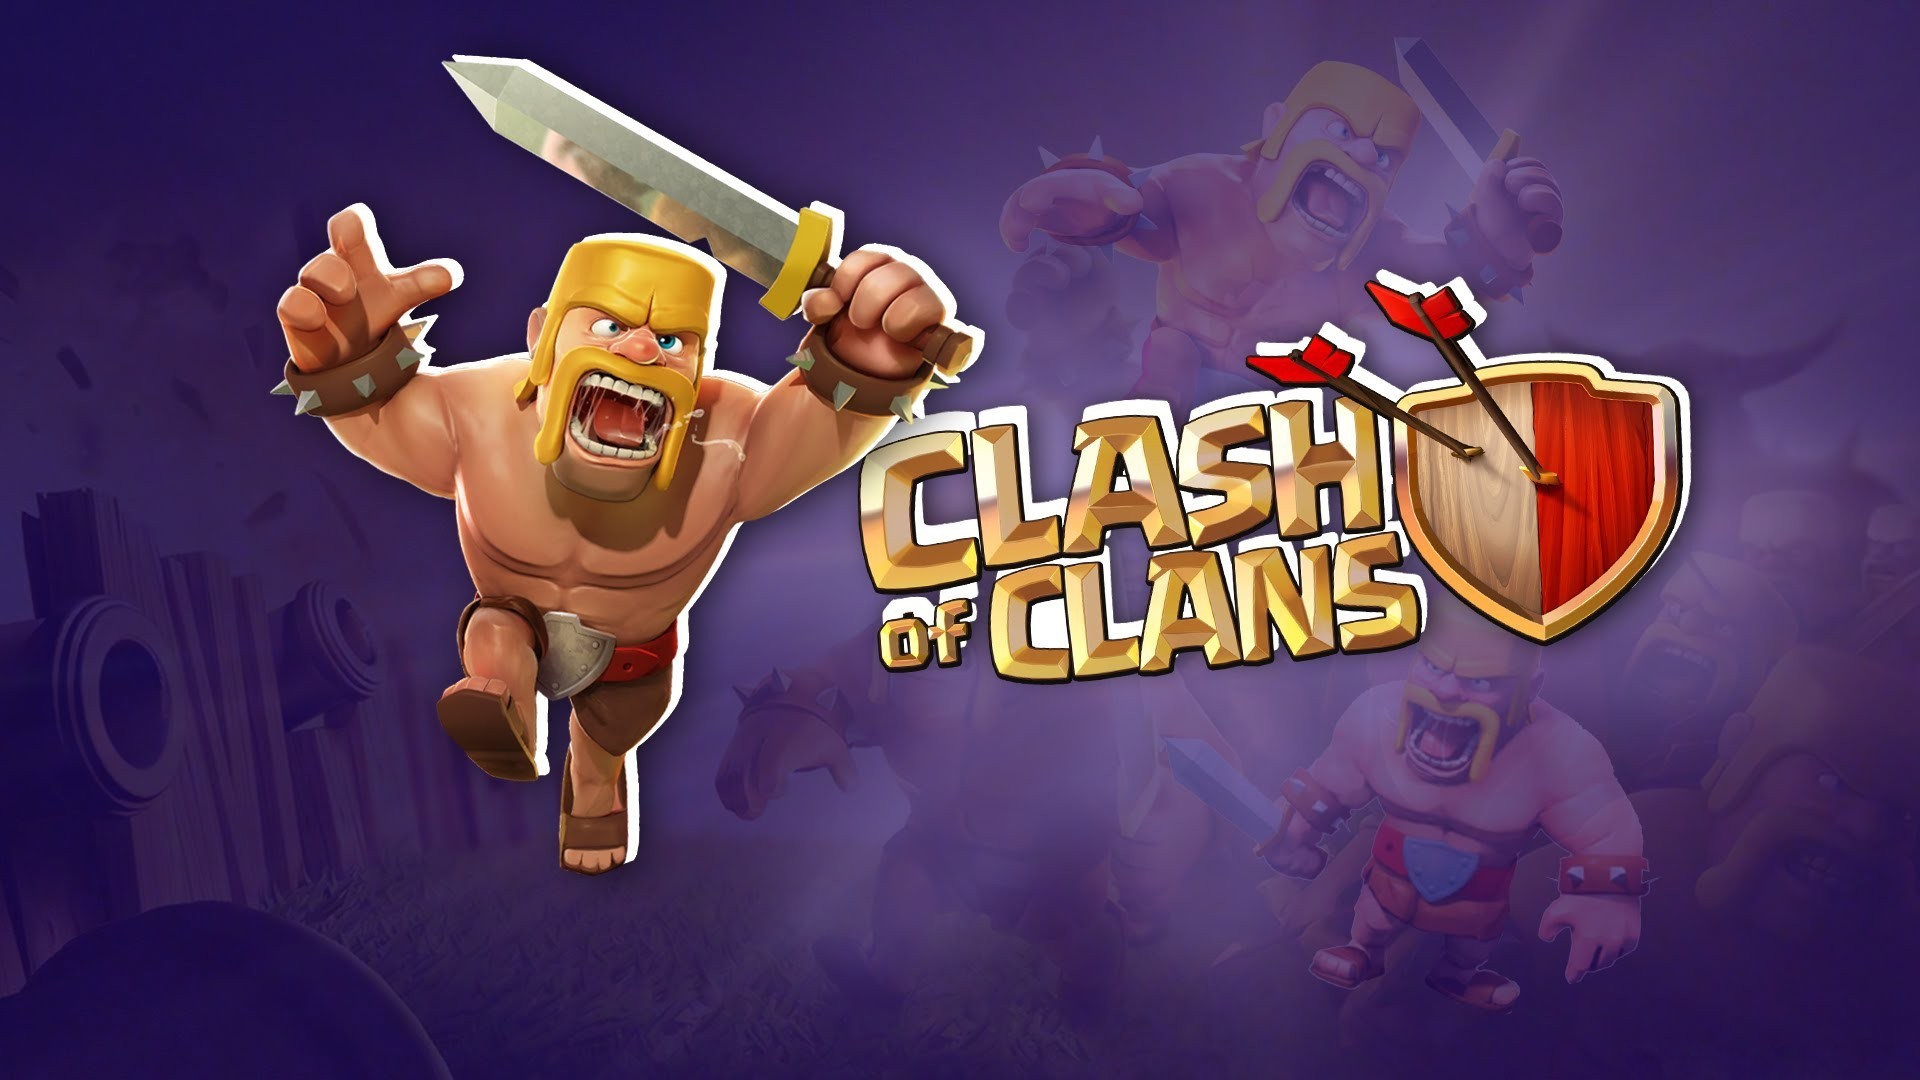 Clash of Clans Wallpapers HD 